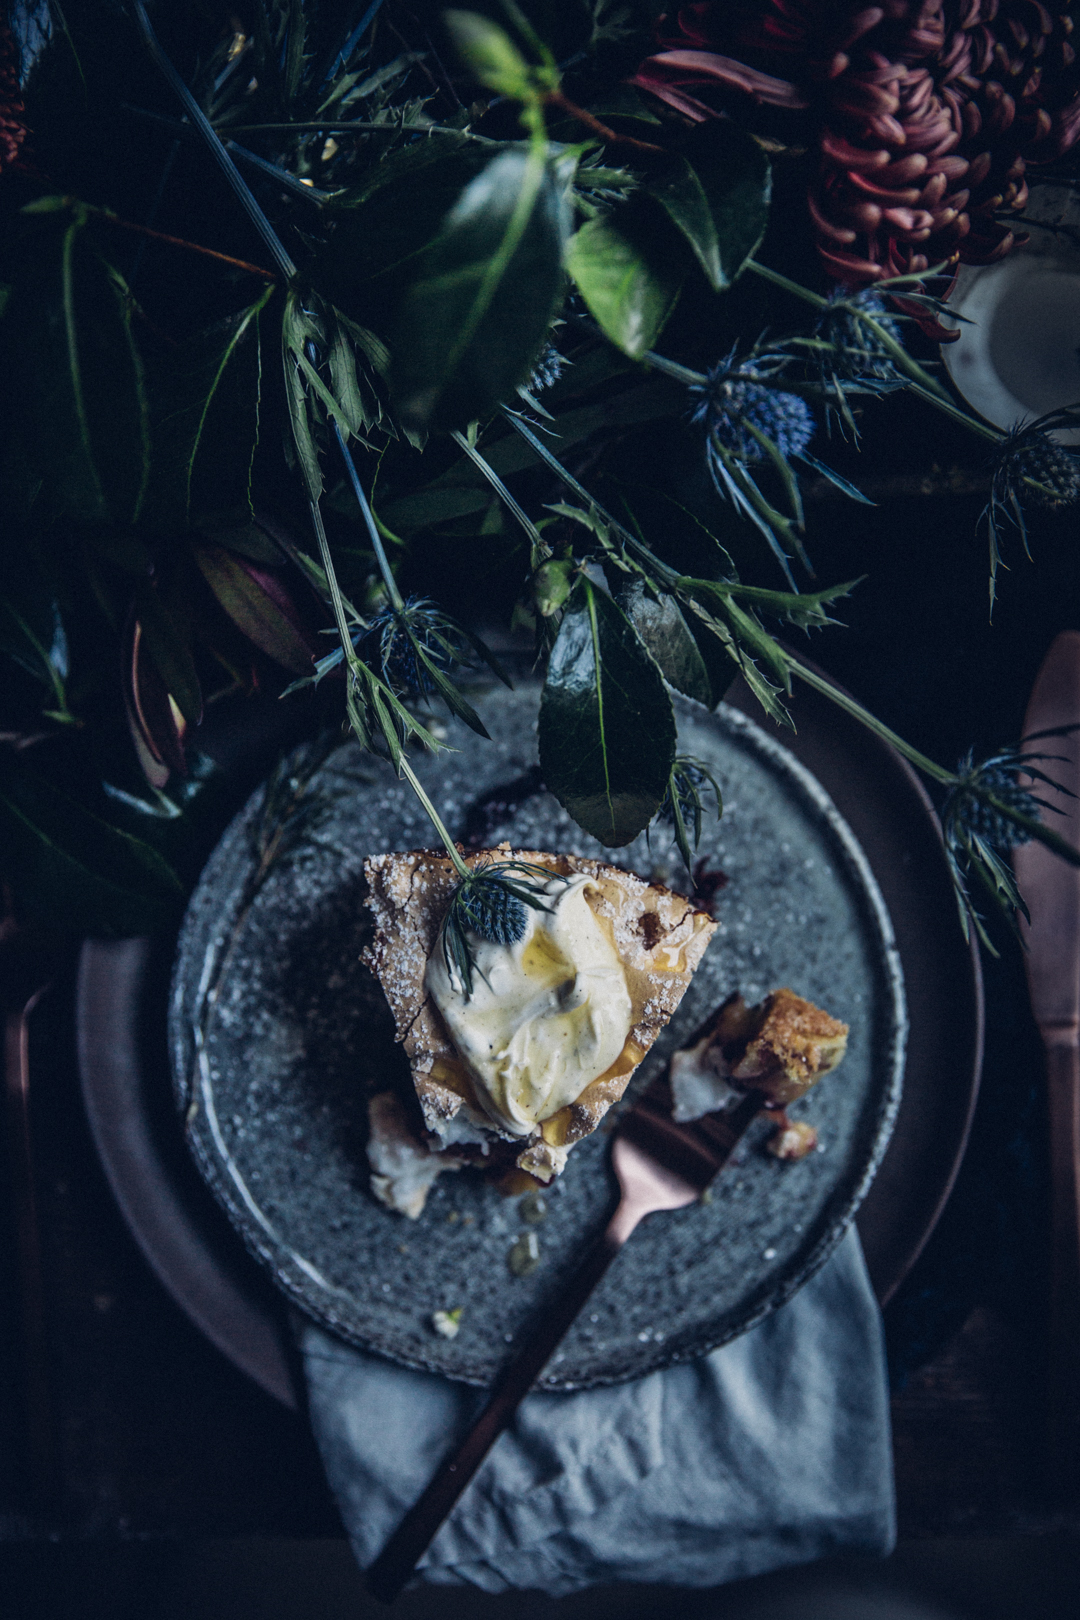 winter-nordic-cake-with-a-rhubarb-black-current-rose-jam-photography-styling-by-christiannkoepke-com-26